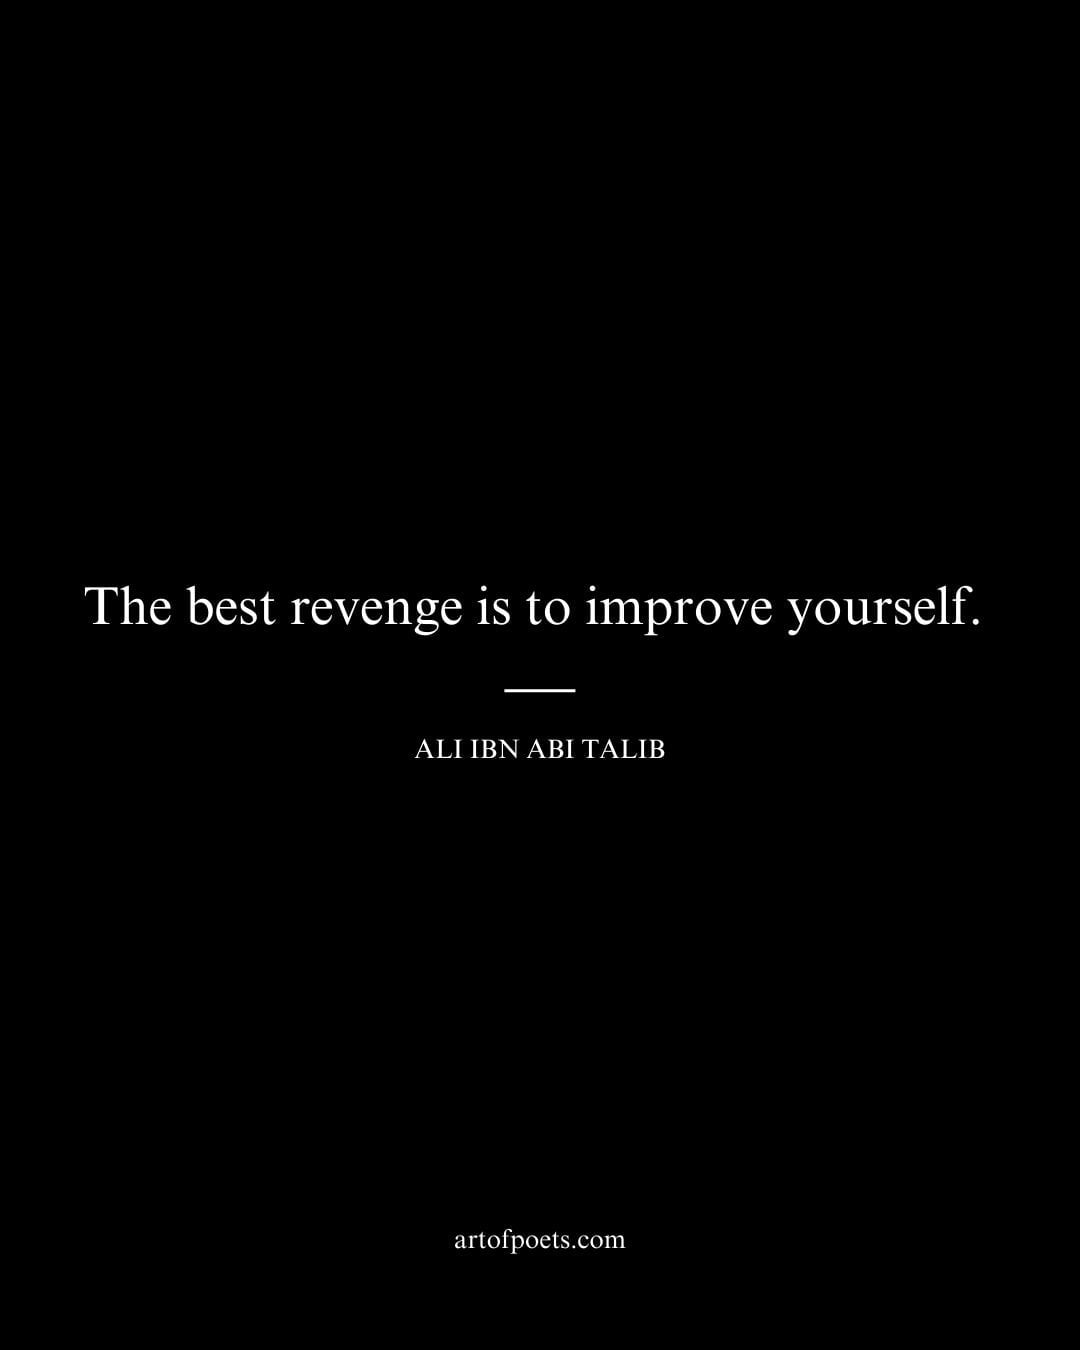 The best revenge is to improve yourself